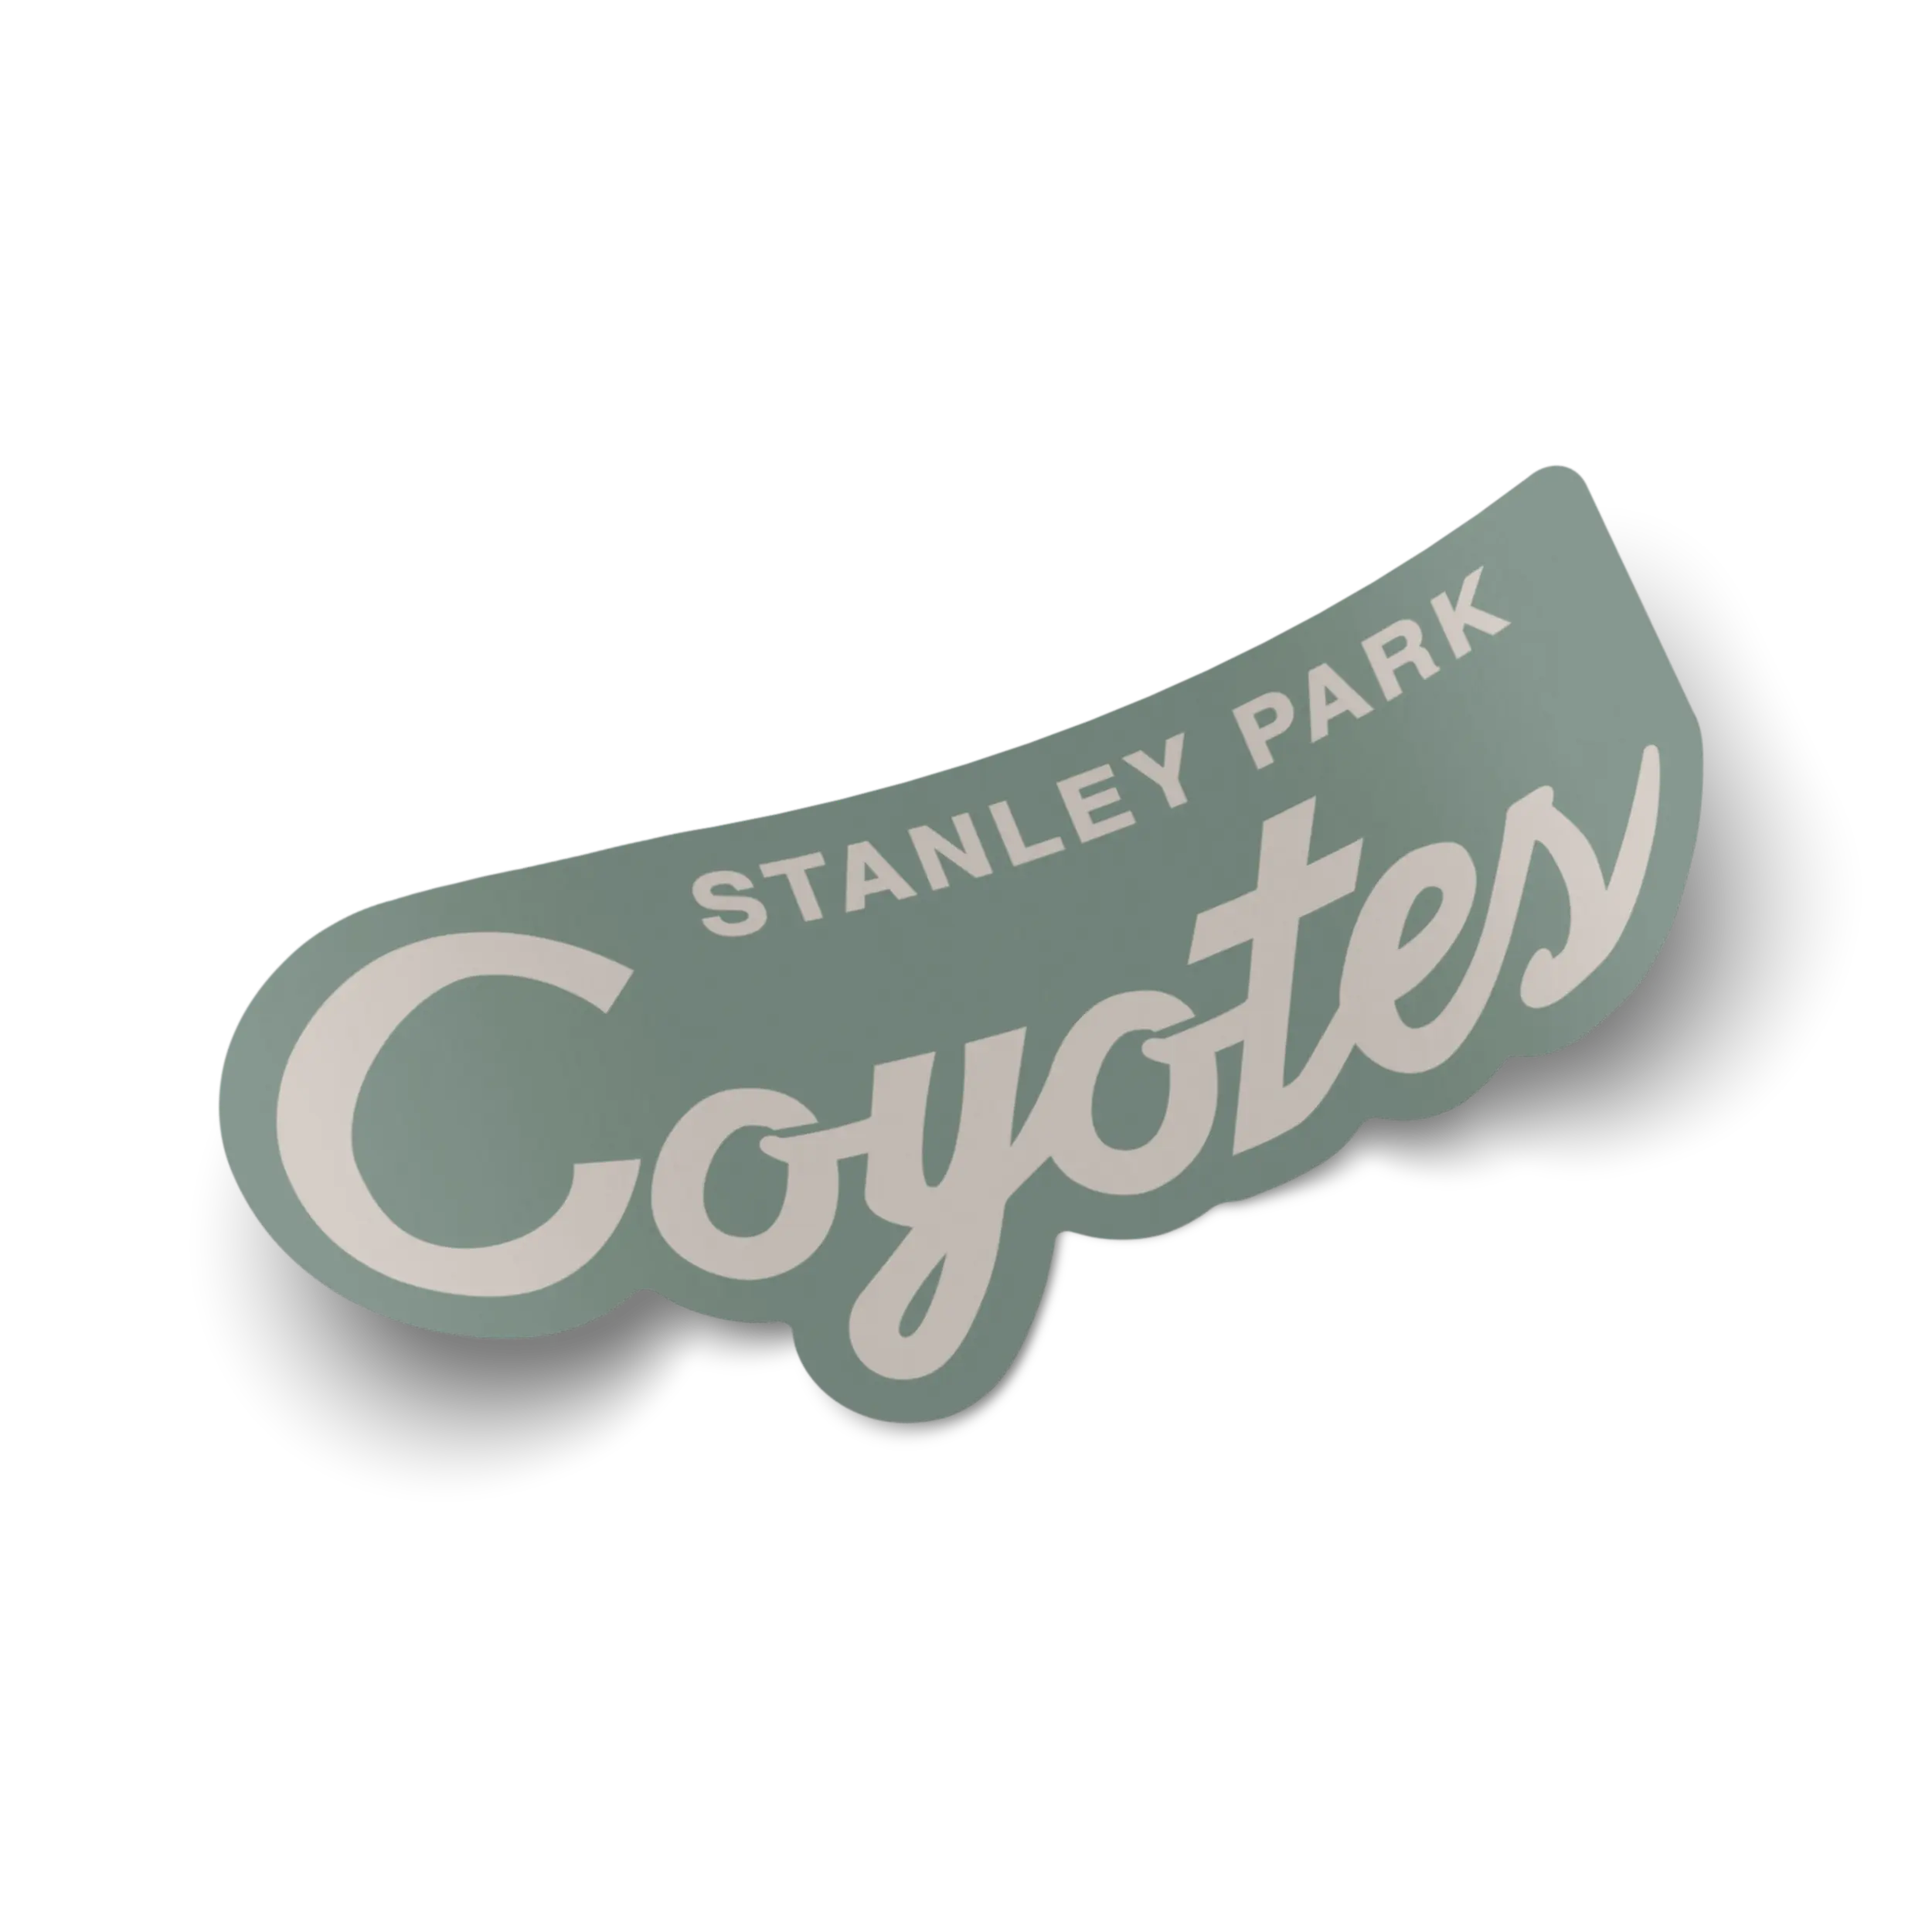 Stanley Park Coyotes Team Sticker (3 Pack)